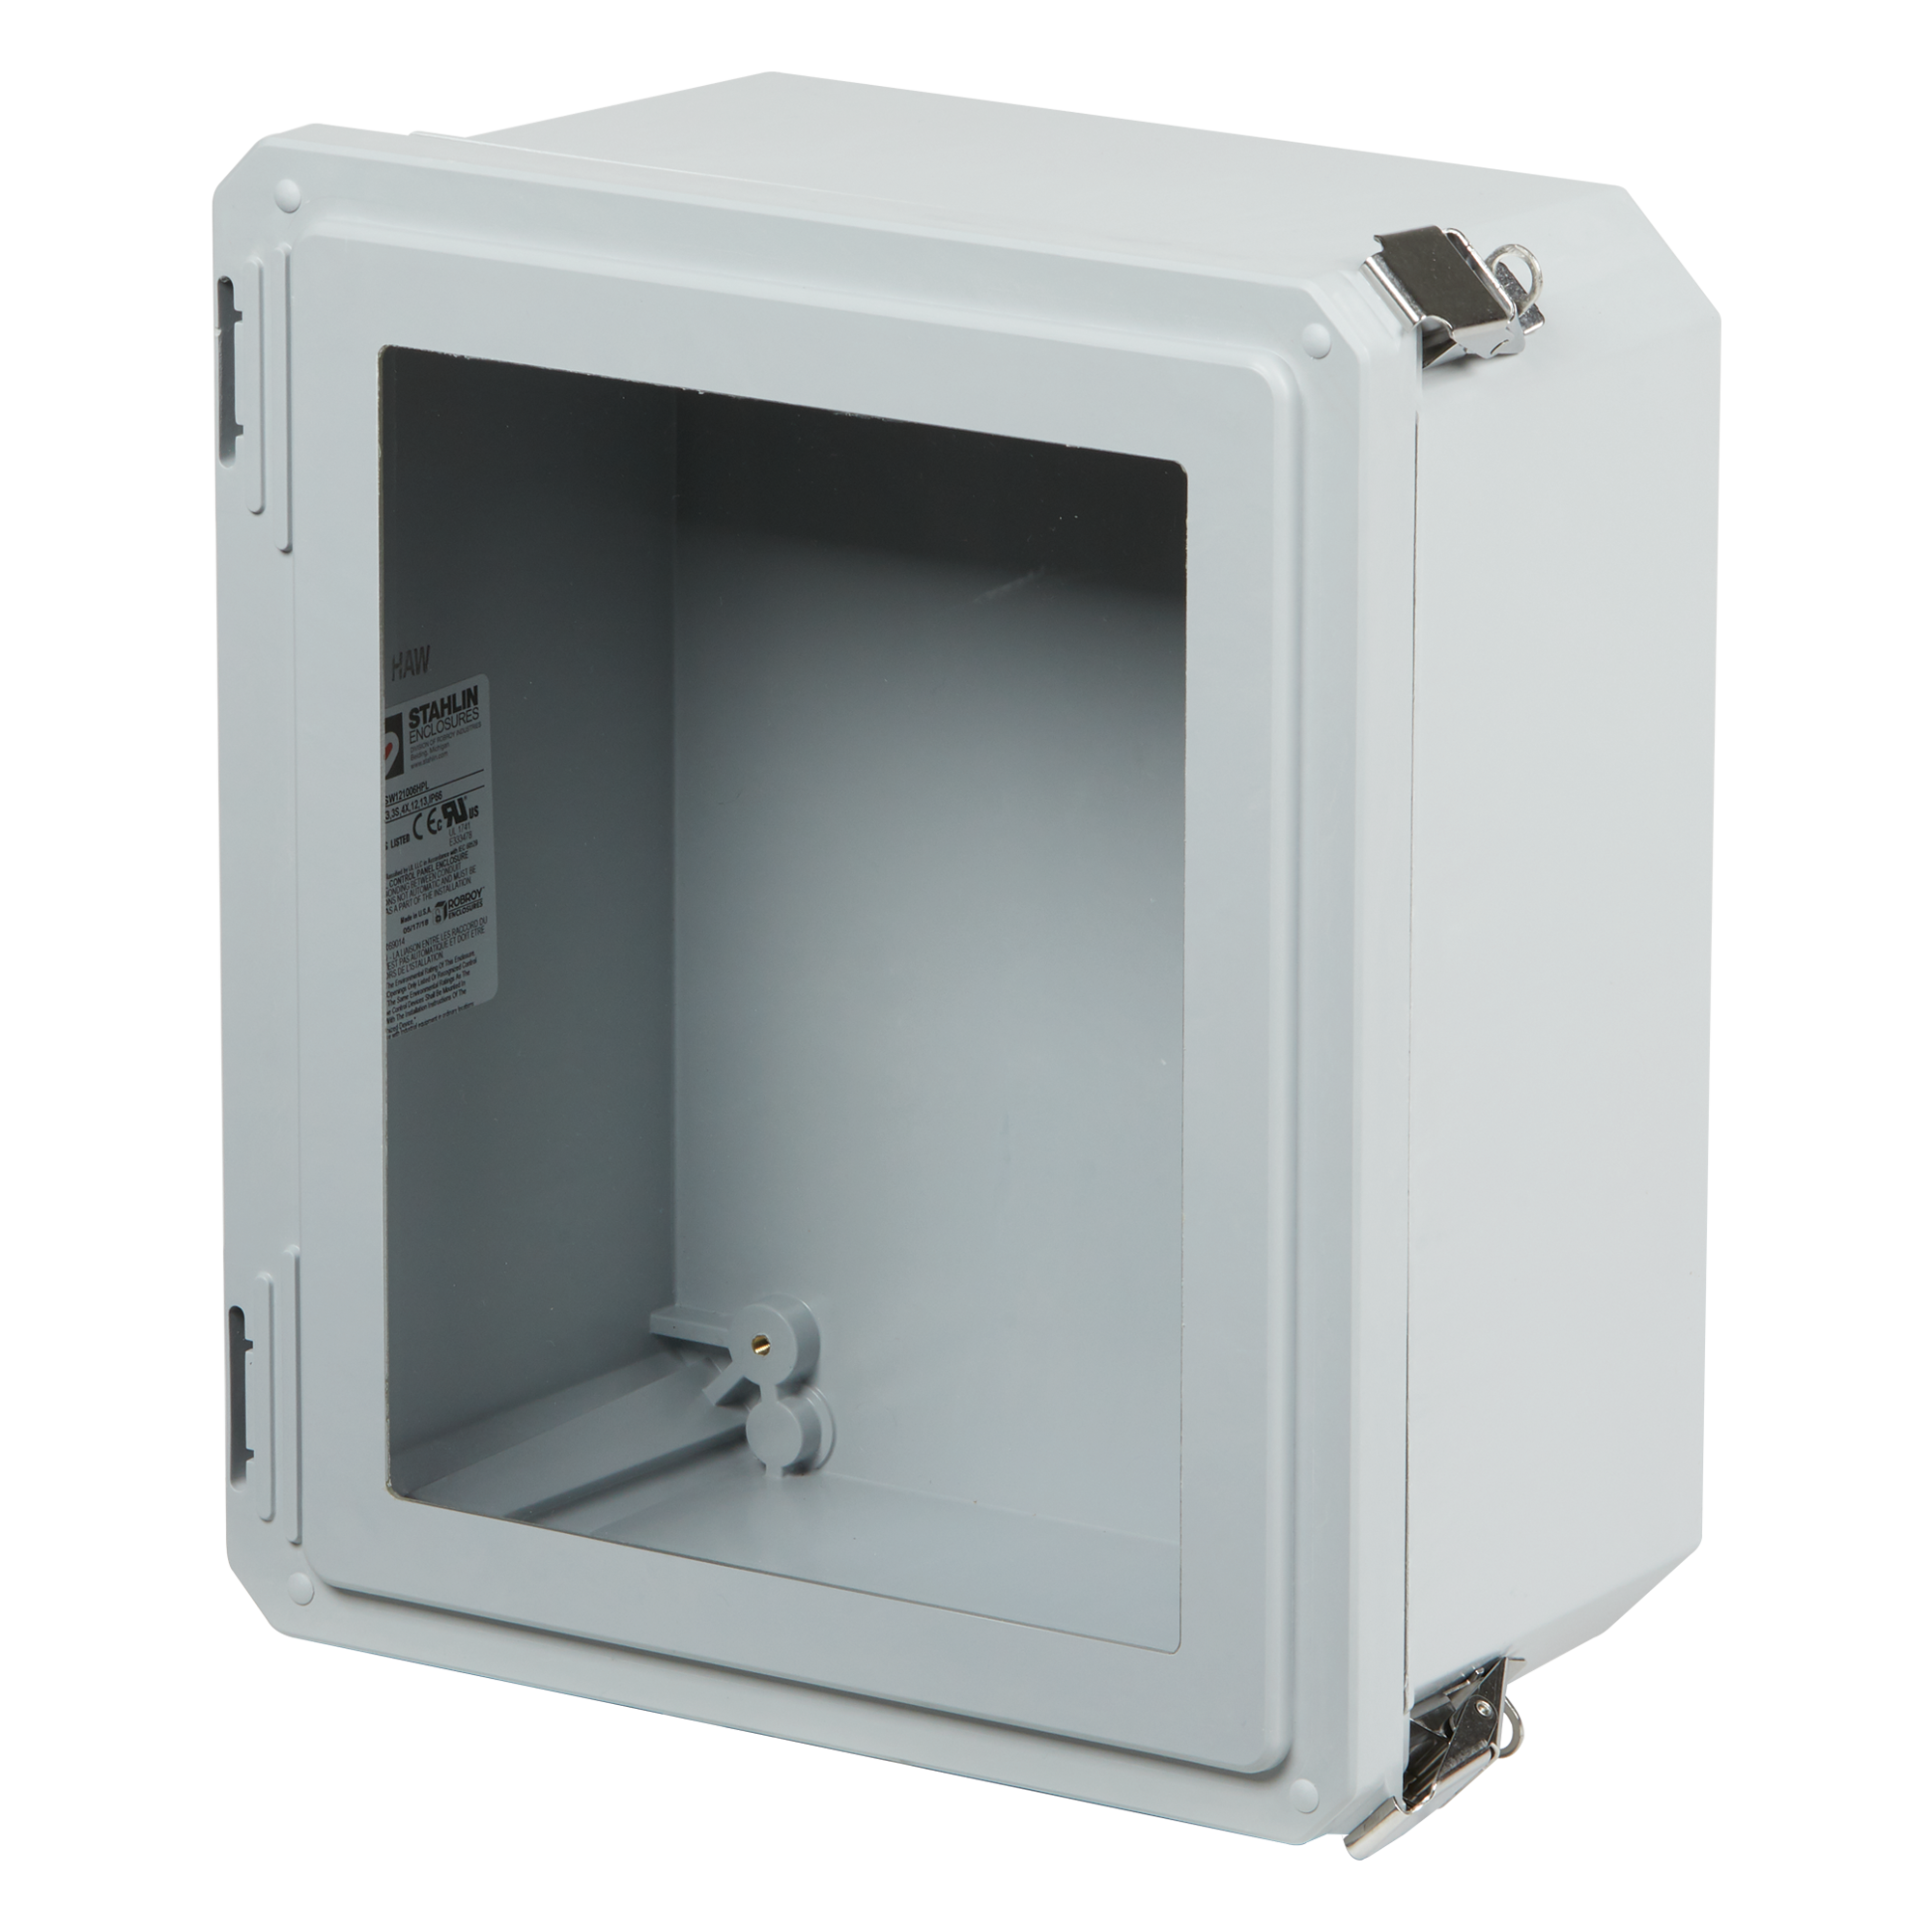 Hubbell Stahlin Enclosure 14 H x 6 D x 12 W 